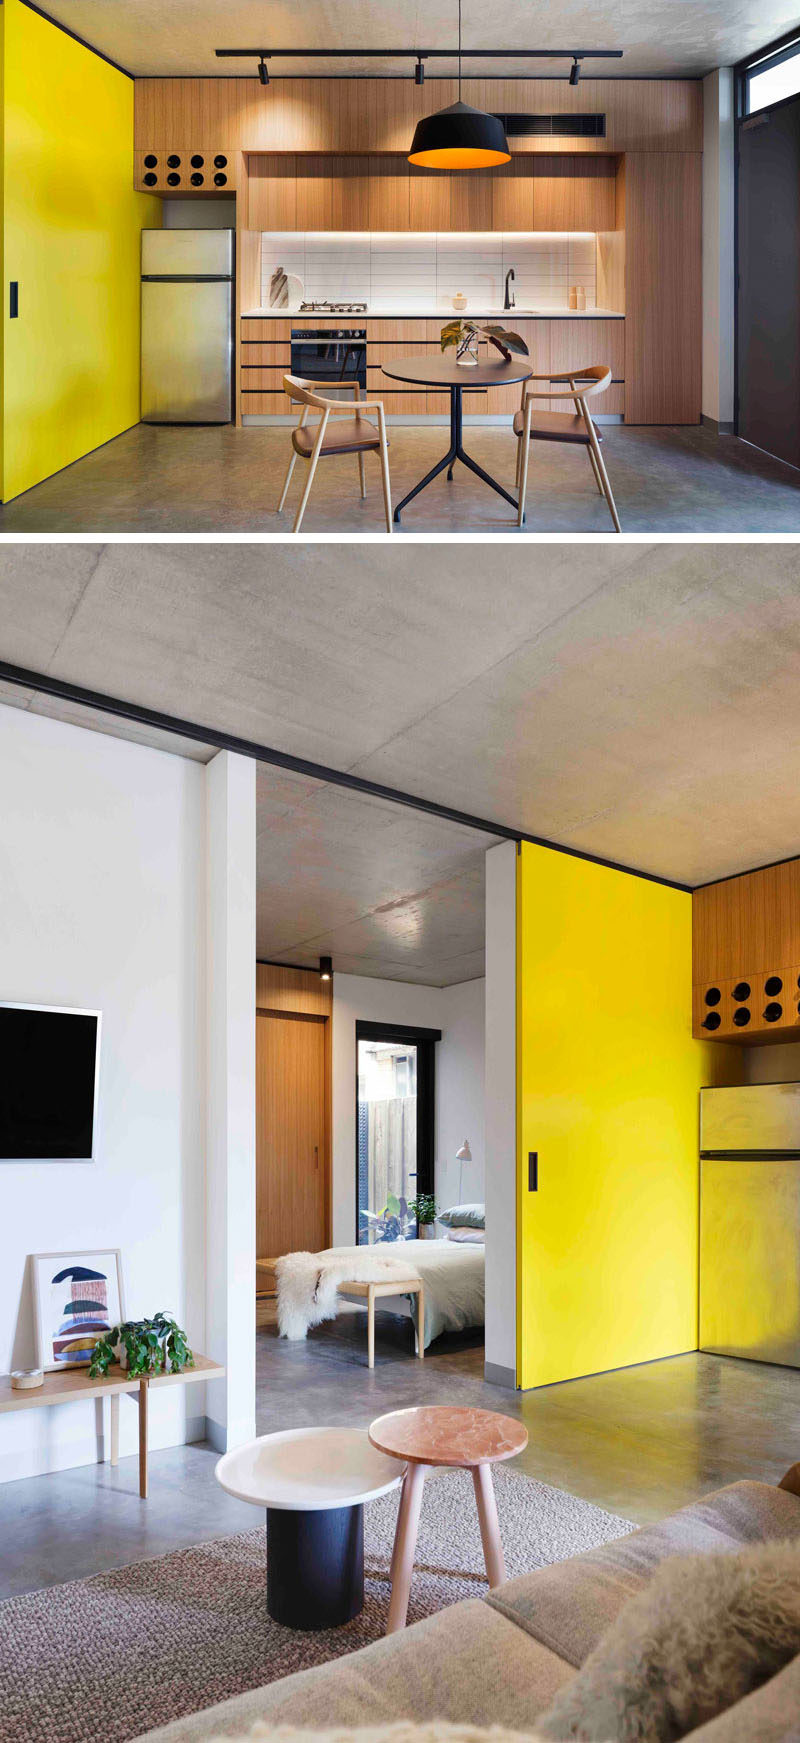 A bright yellow door adds a pop of color to this apartment and slides open to reveal the bedroom.